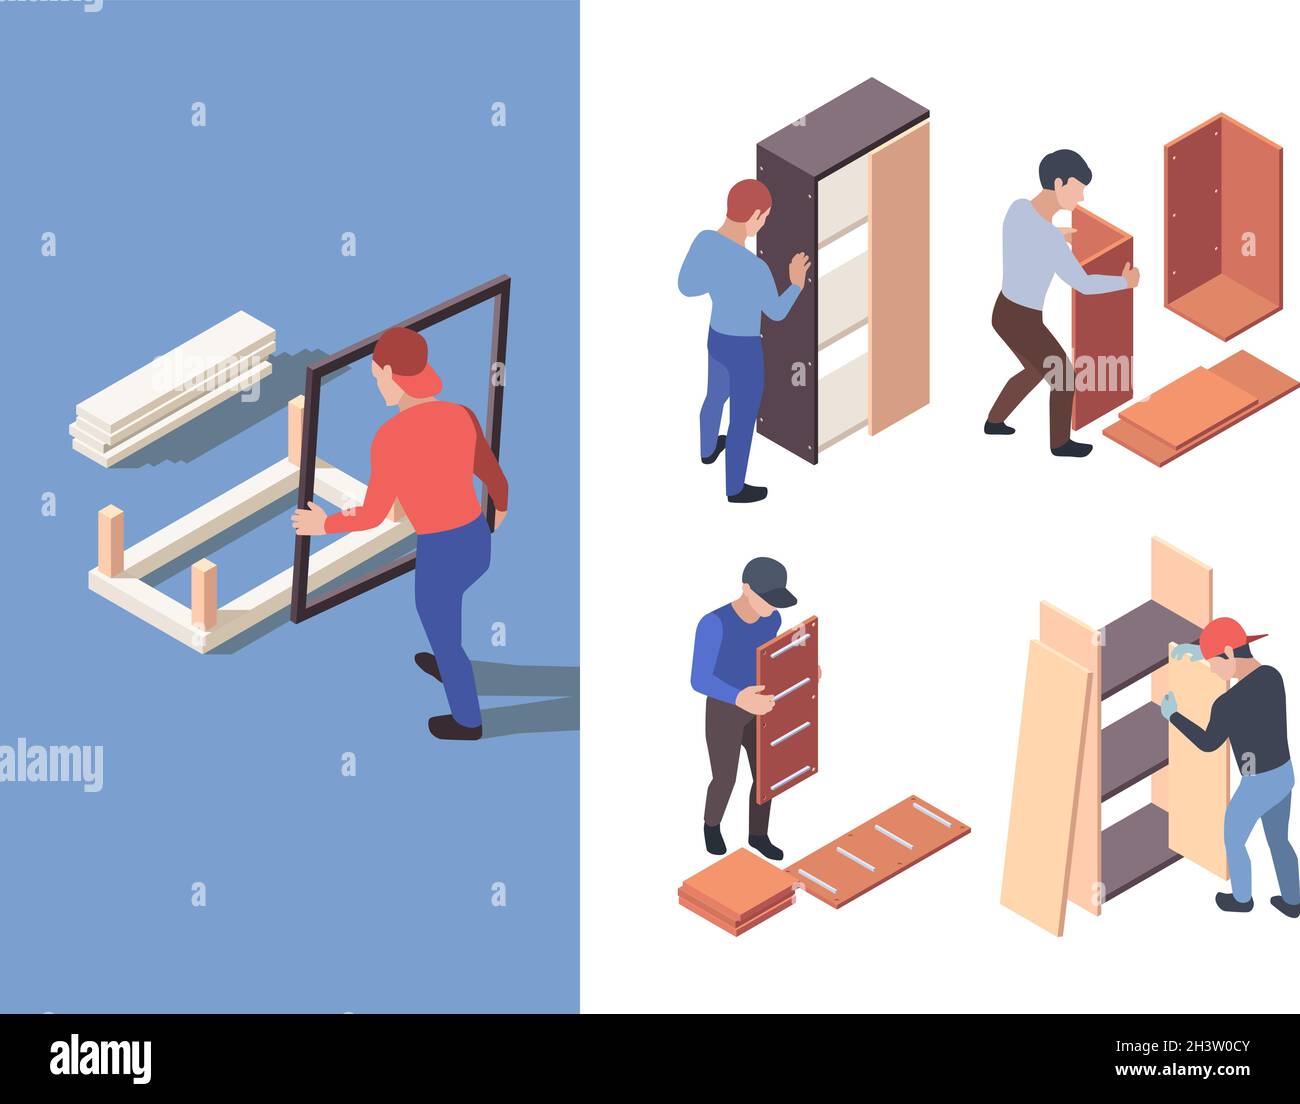 Furniture assembly. People crafting wooden furnitures with instructions garish vector isometric characters workers Stock Vector